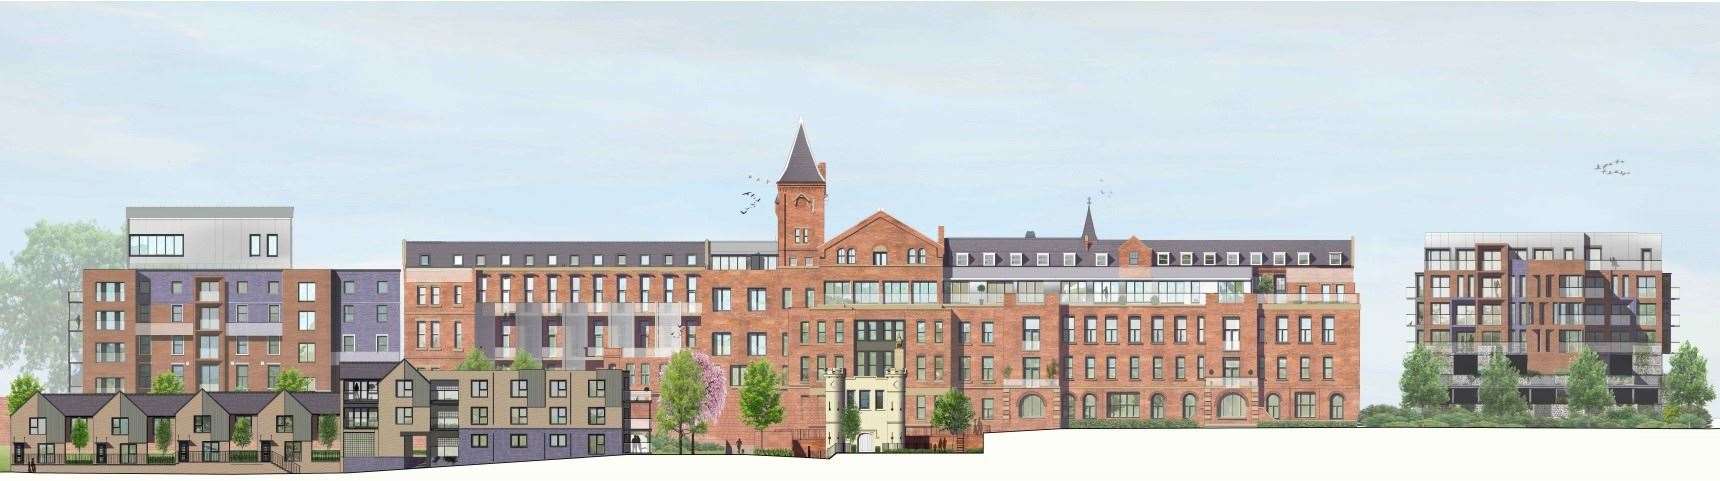 The view from the street of the new proposals to renovate and converted the former St Bartholomew's Hosptial in Rochester into new flats and a community centre. Picture: Boyer Planning Ltd